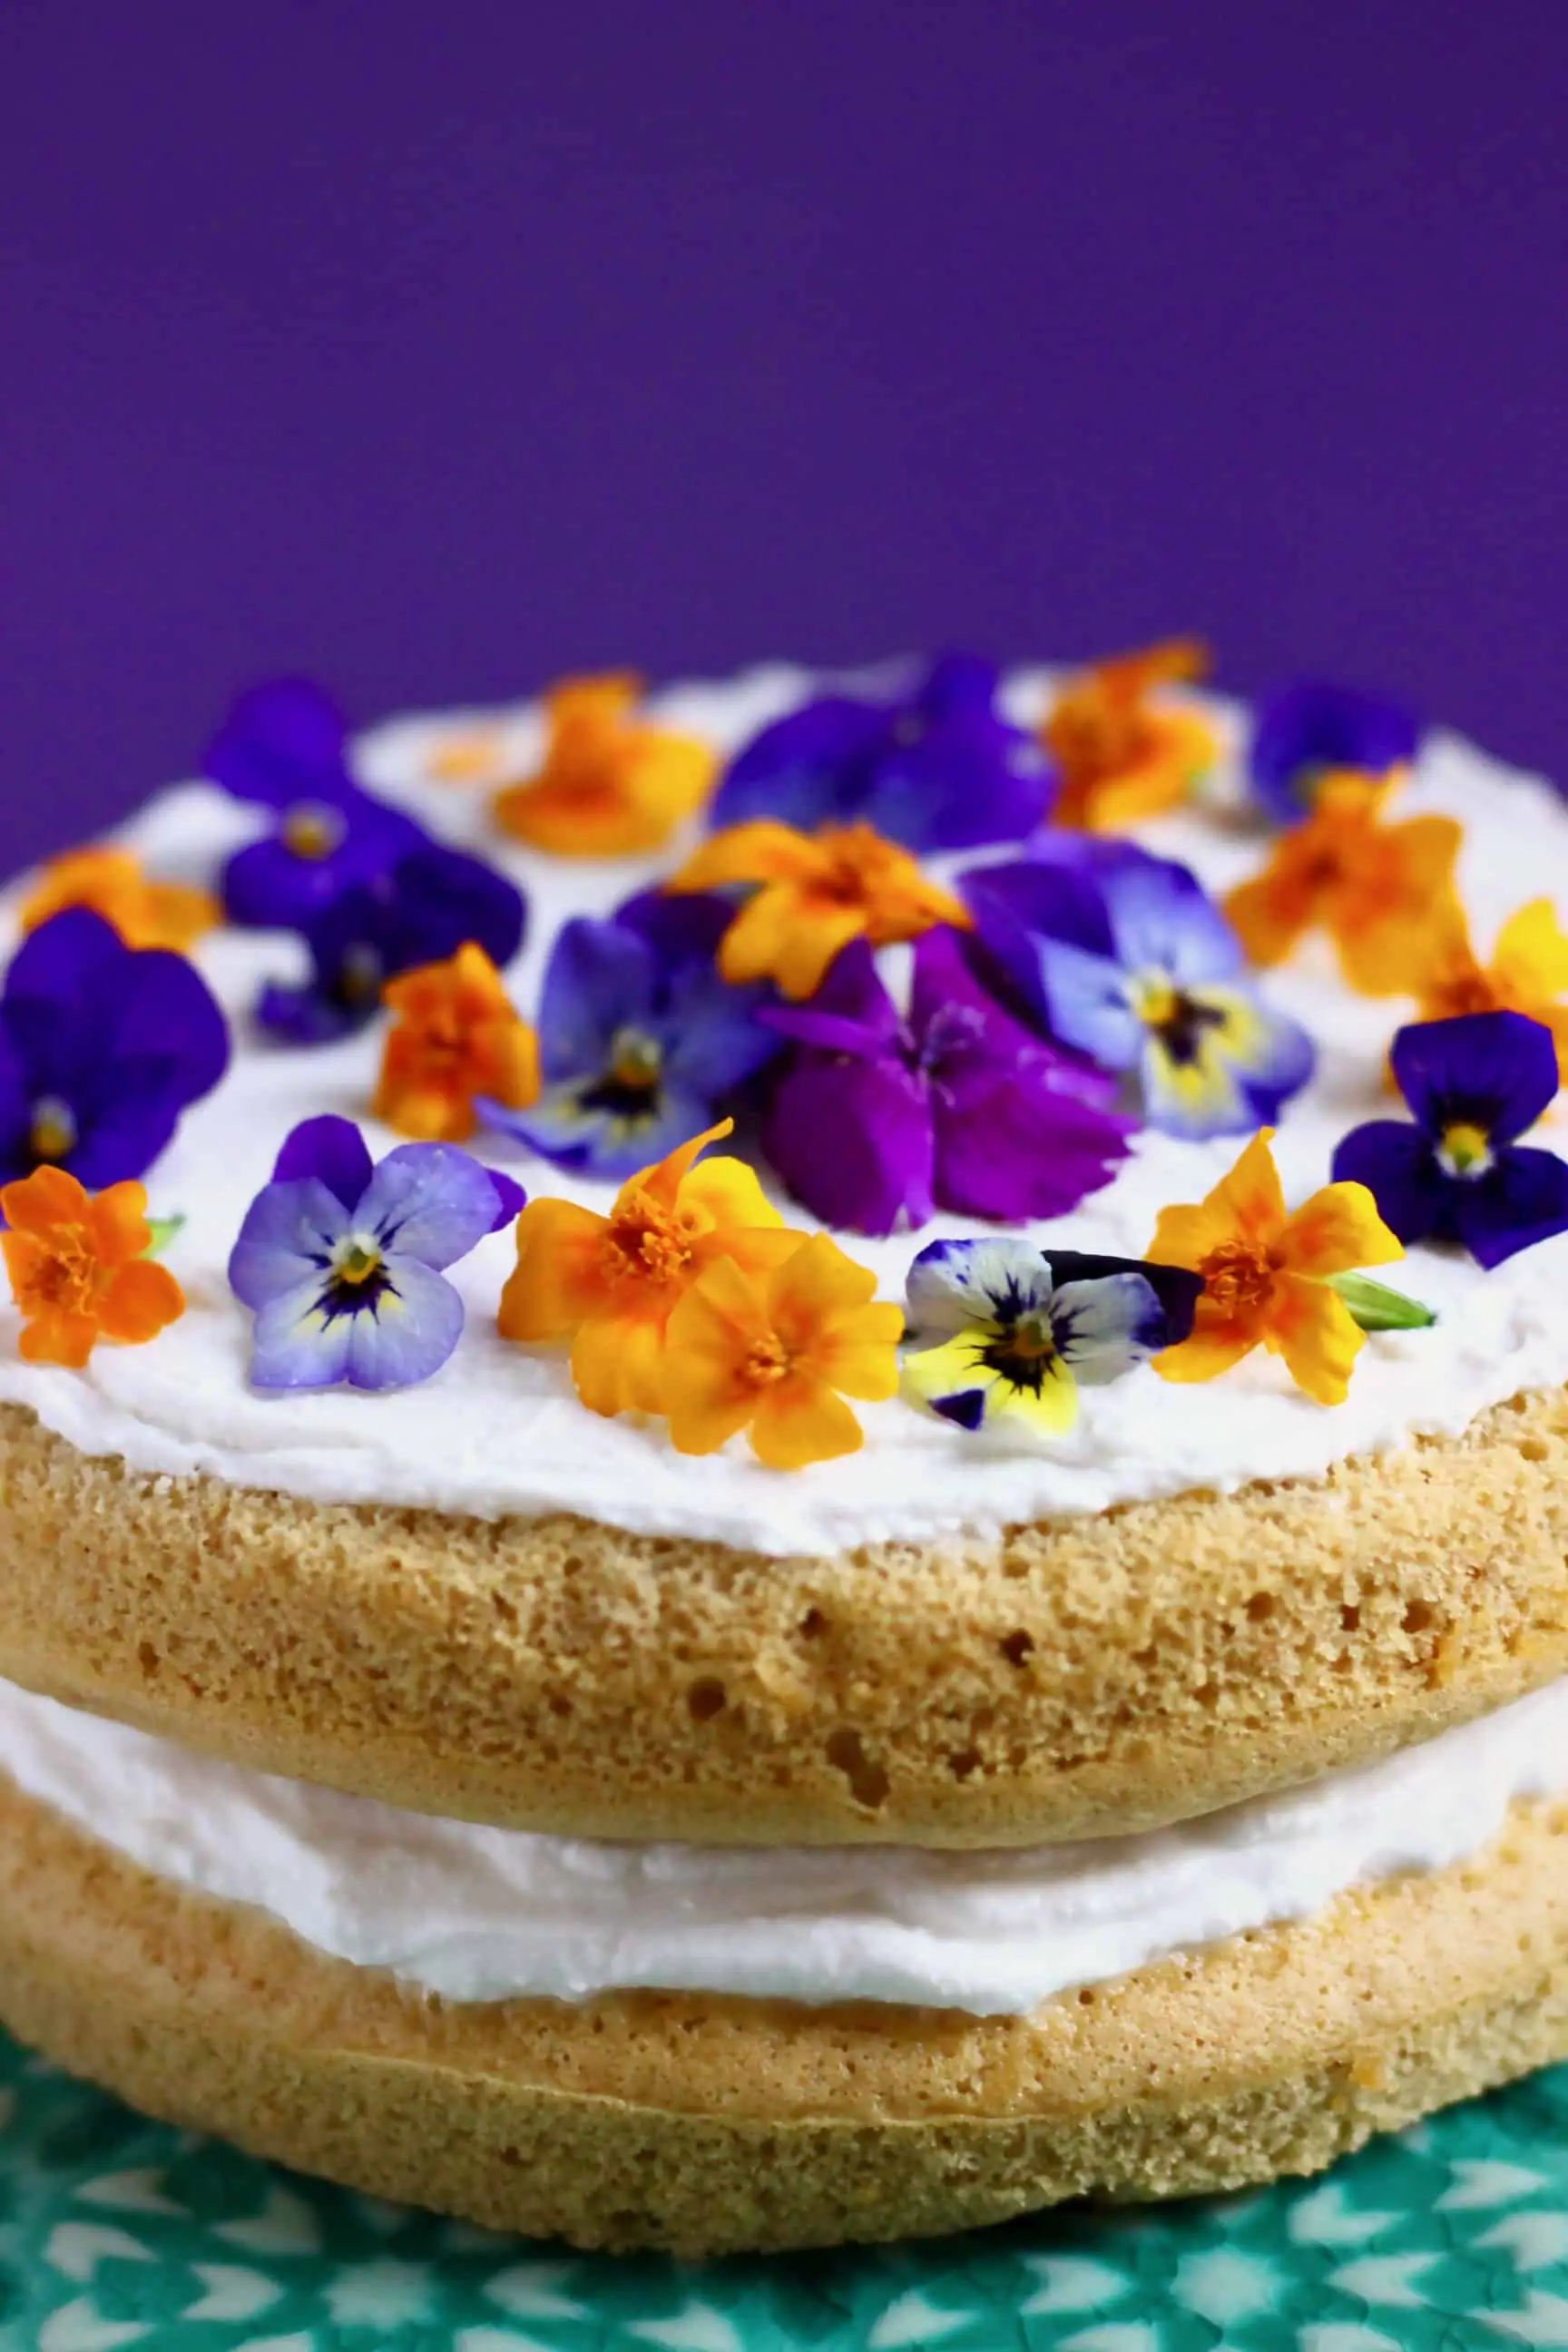 A pumpkin sponge sandwiched with white frosting topped with purple and orange flowers on a green cake stand against a purple background